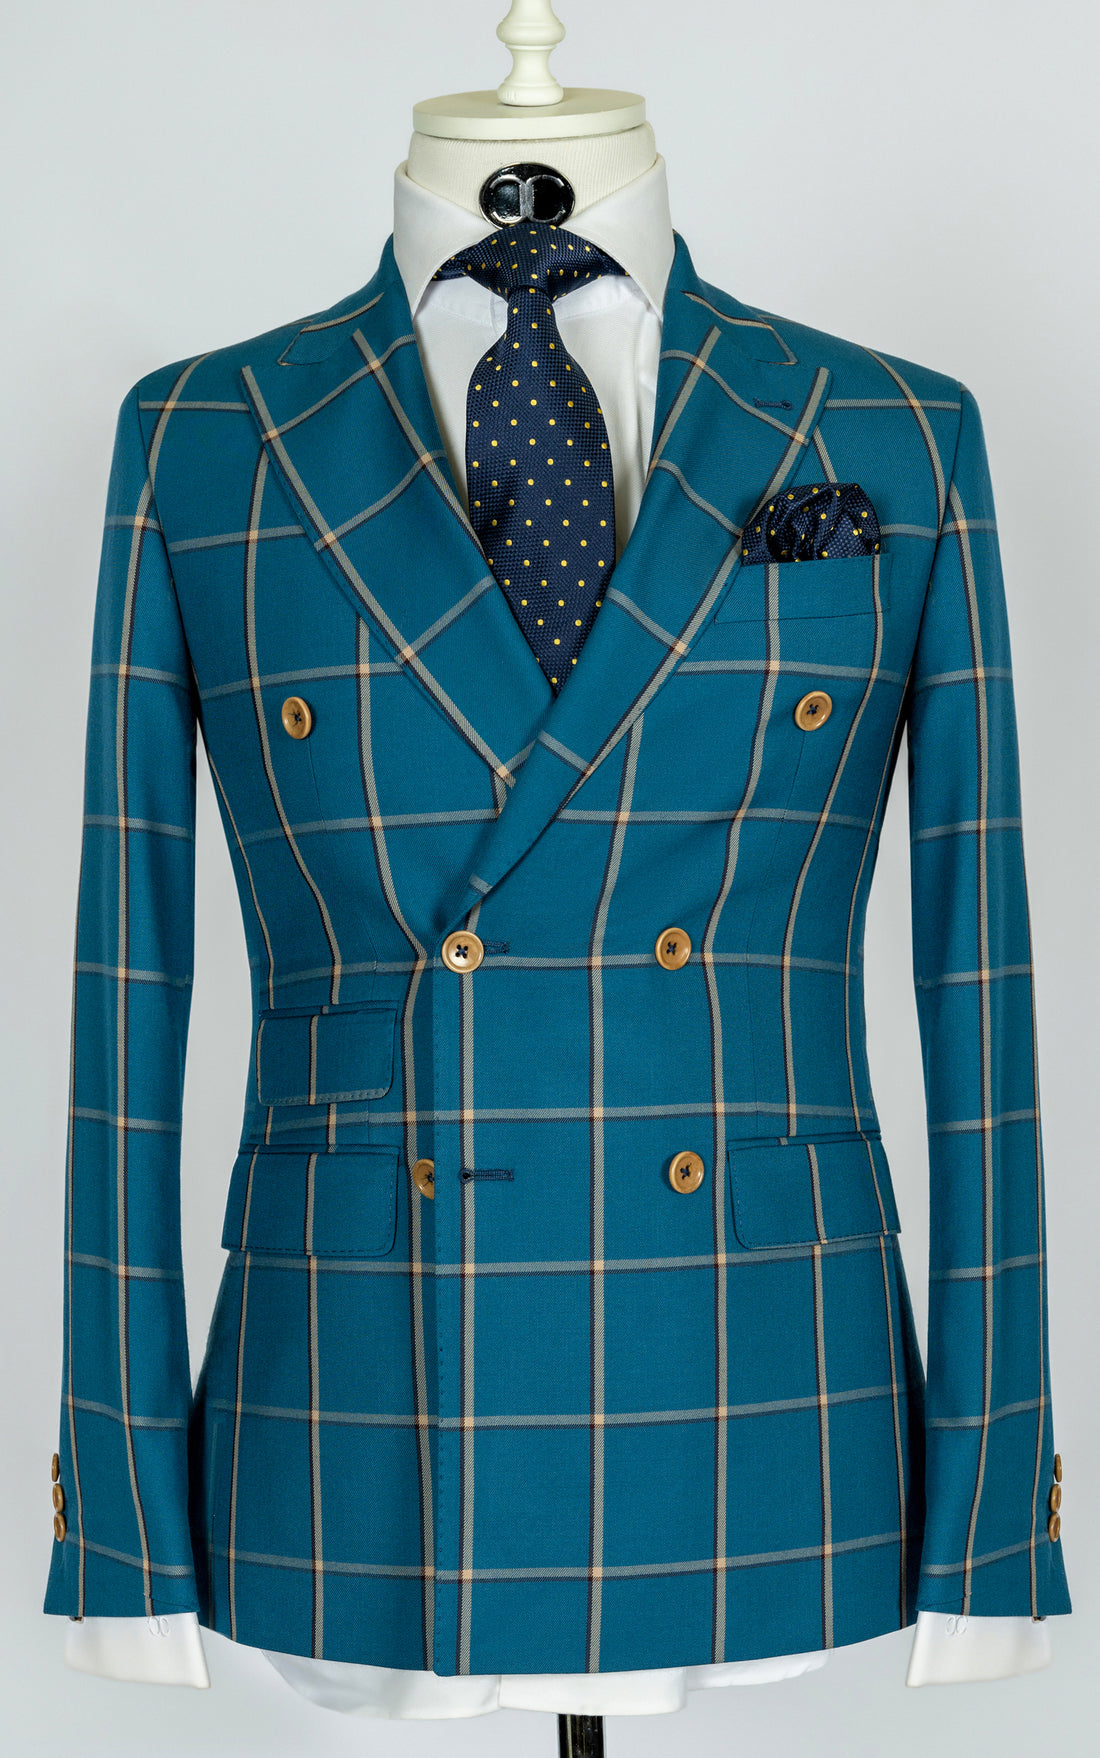 Tollegno - Turquoise with brown and blue windowpane double breasted 2-piece slim fit suit